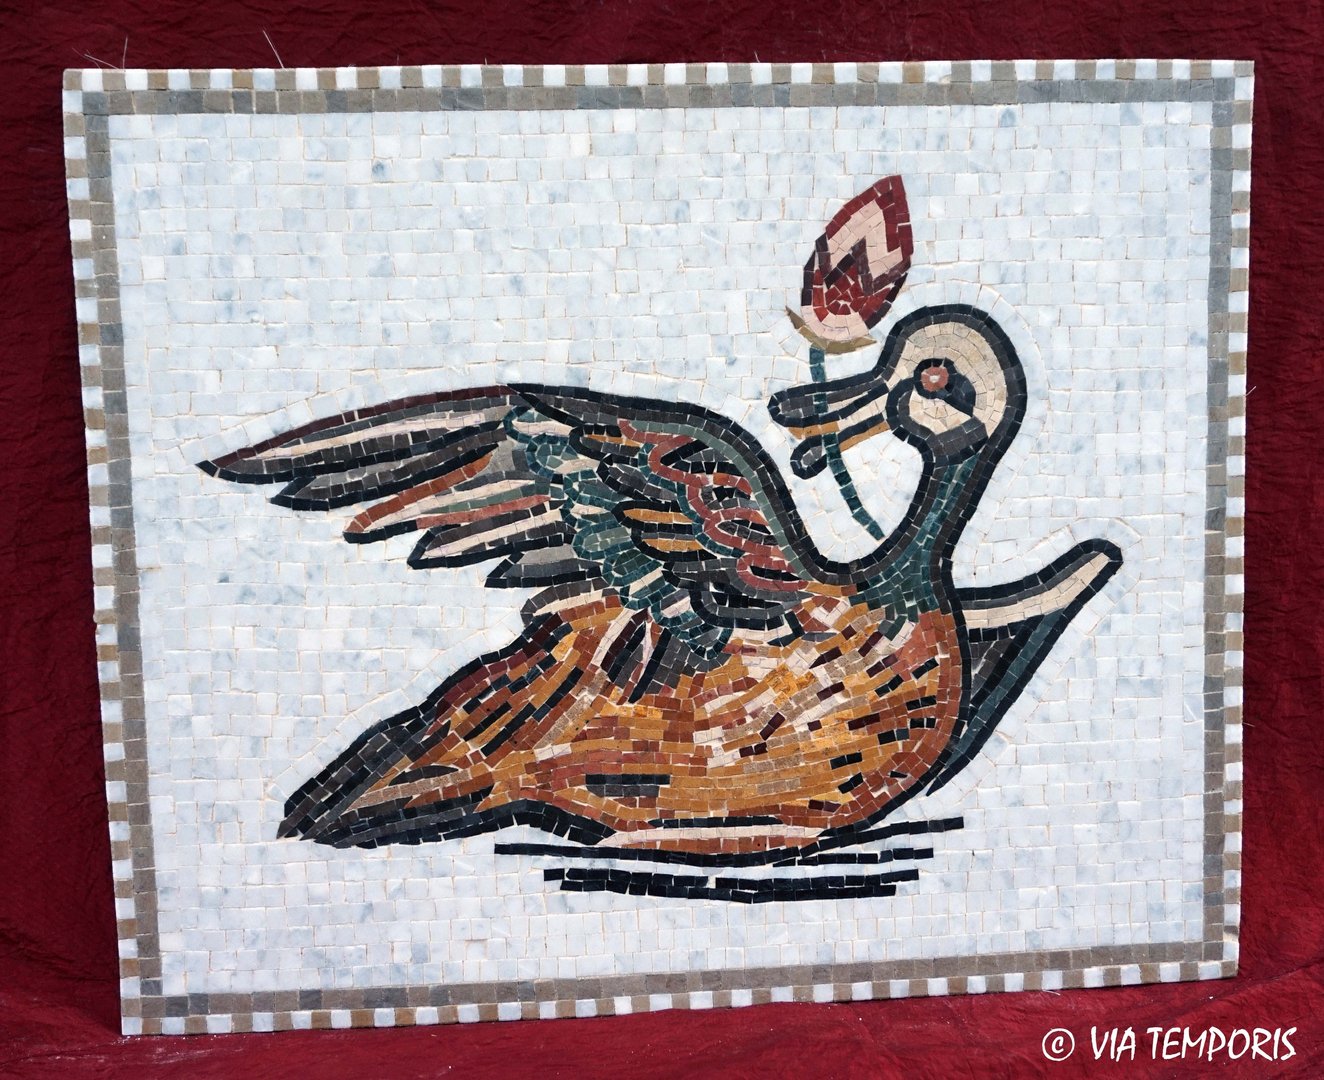 ROMAN MOSAIC - DUCK WITH FLOWER IN THE SPOUT